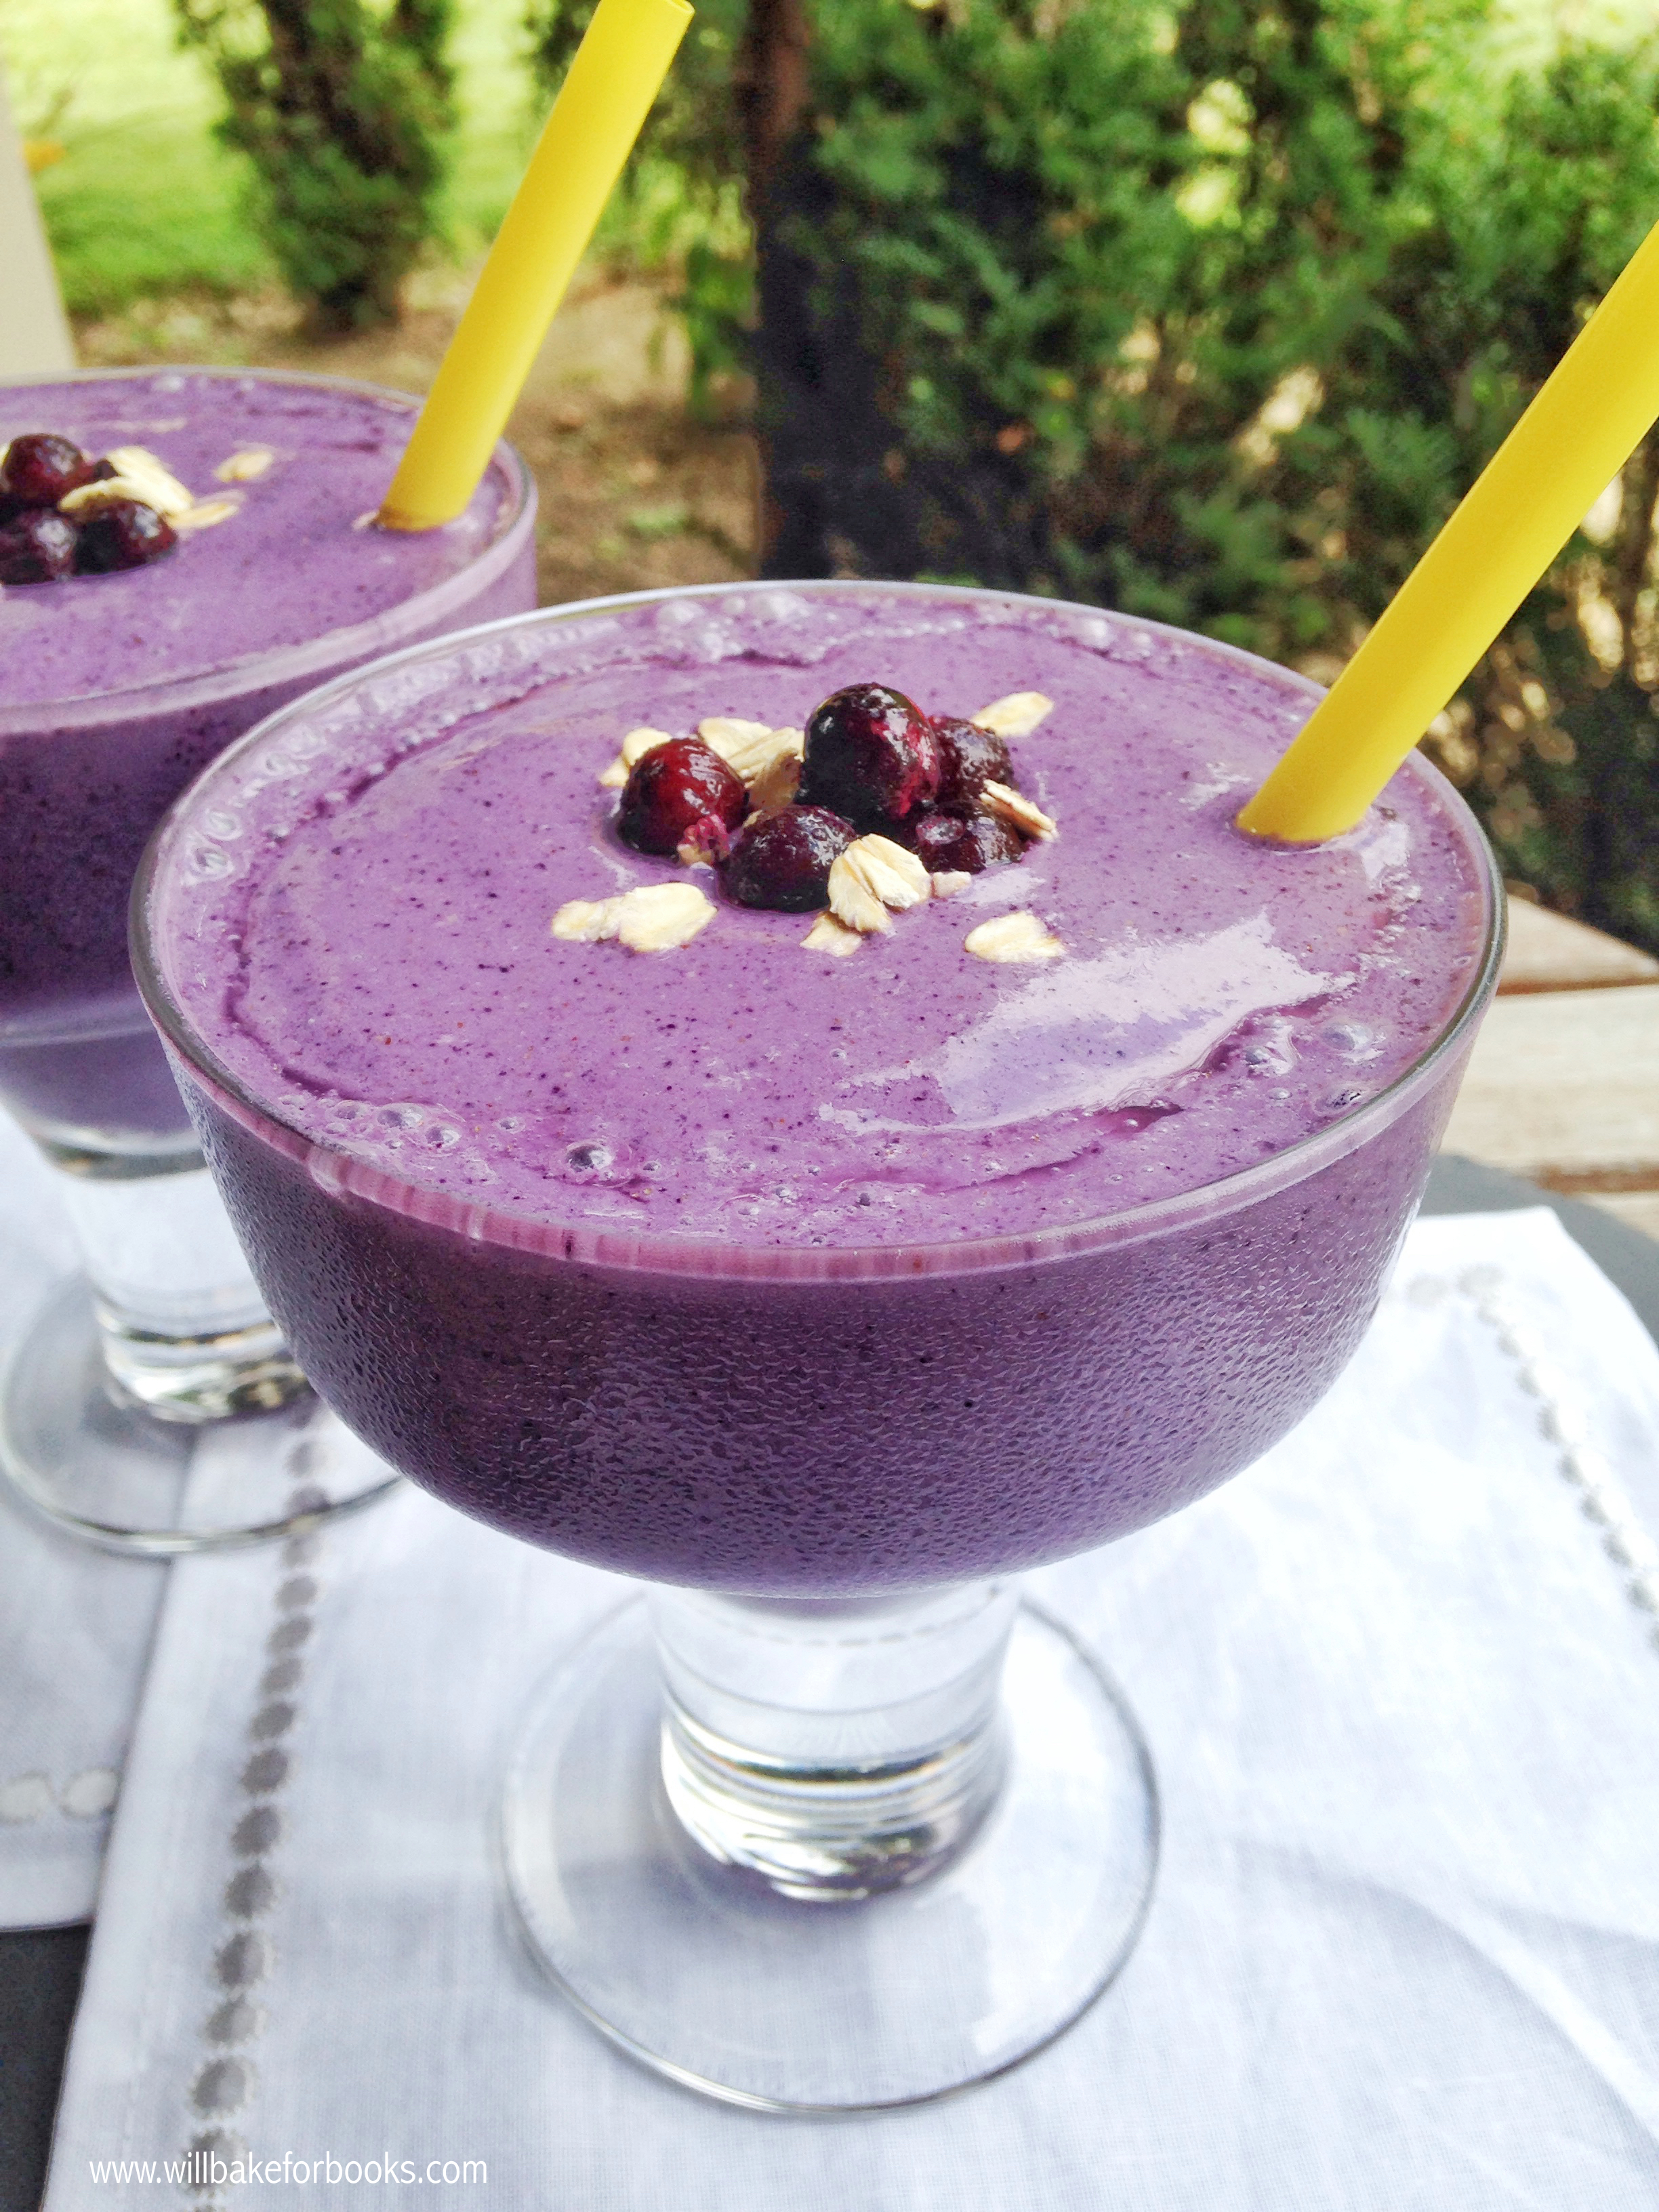 Blueberry Oatmeal Smoothies | www.willbakeforbooks.com